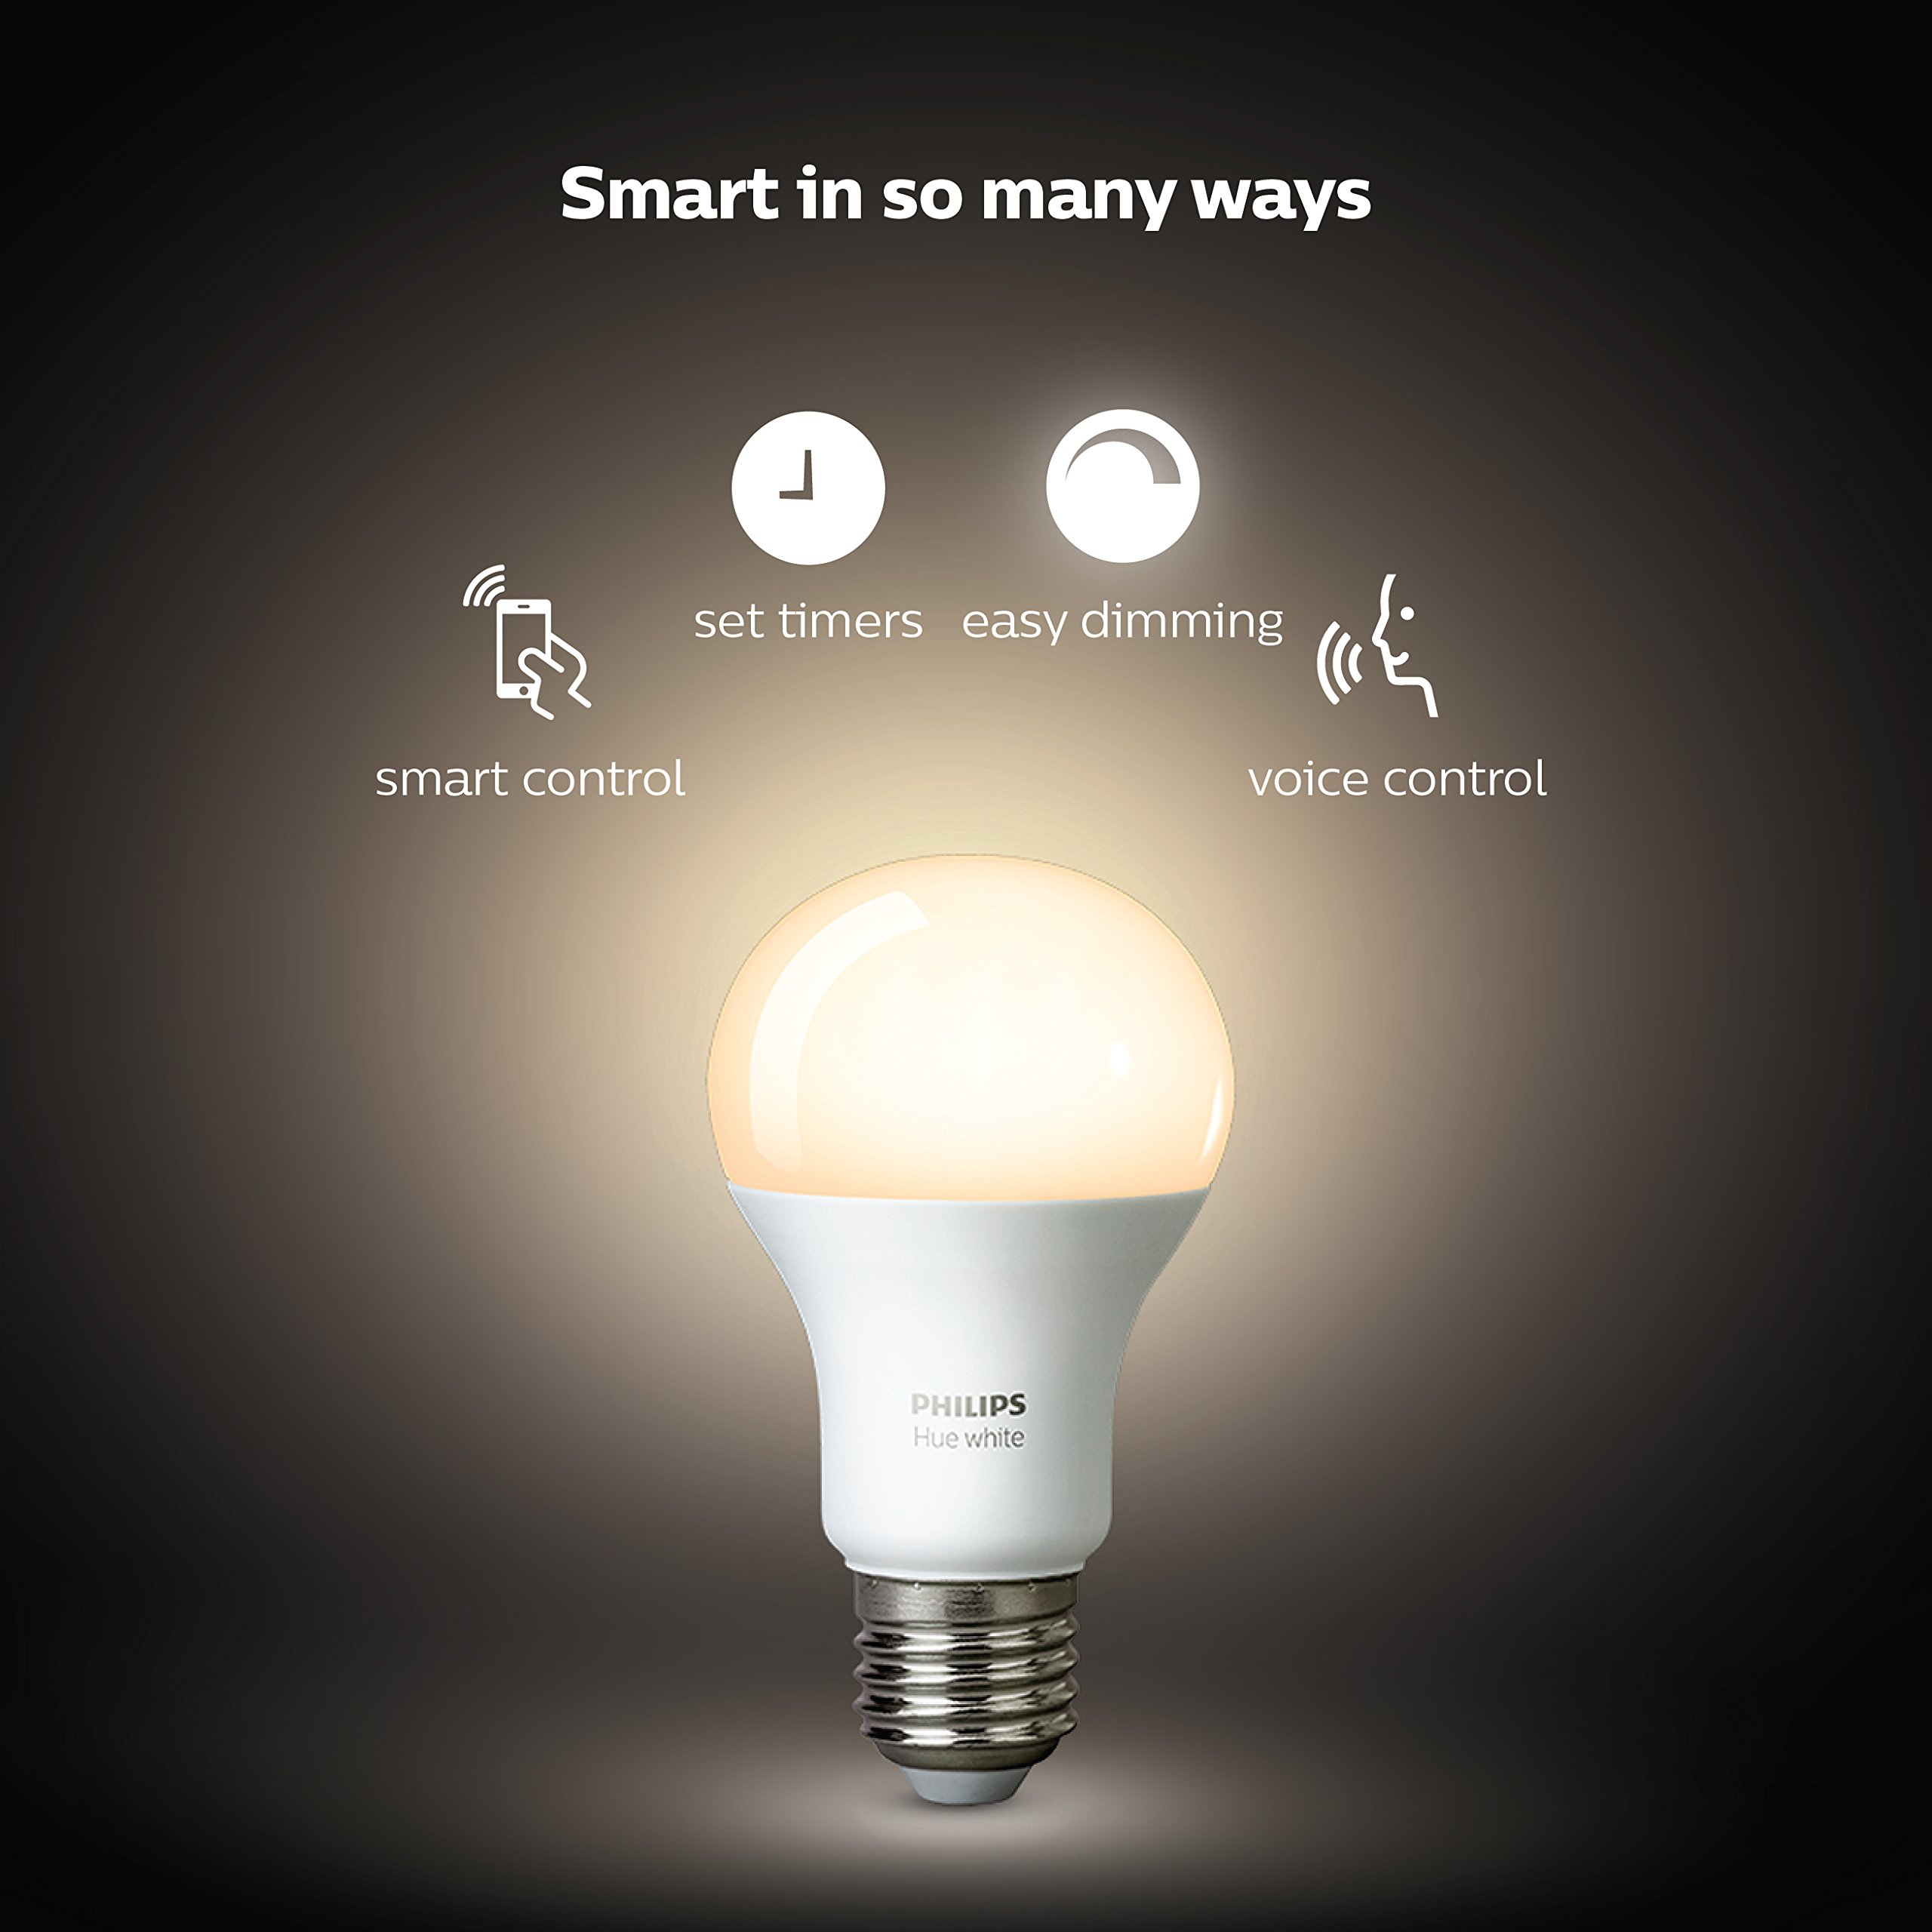 Philips Hue White A19 60W Equivalent LED Smart Bulb Starter Kit (4 A19 White Bulbs and 1 Hub Compatible with Amazon Alexa Apple HomeKit and Google Assistant)